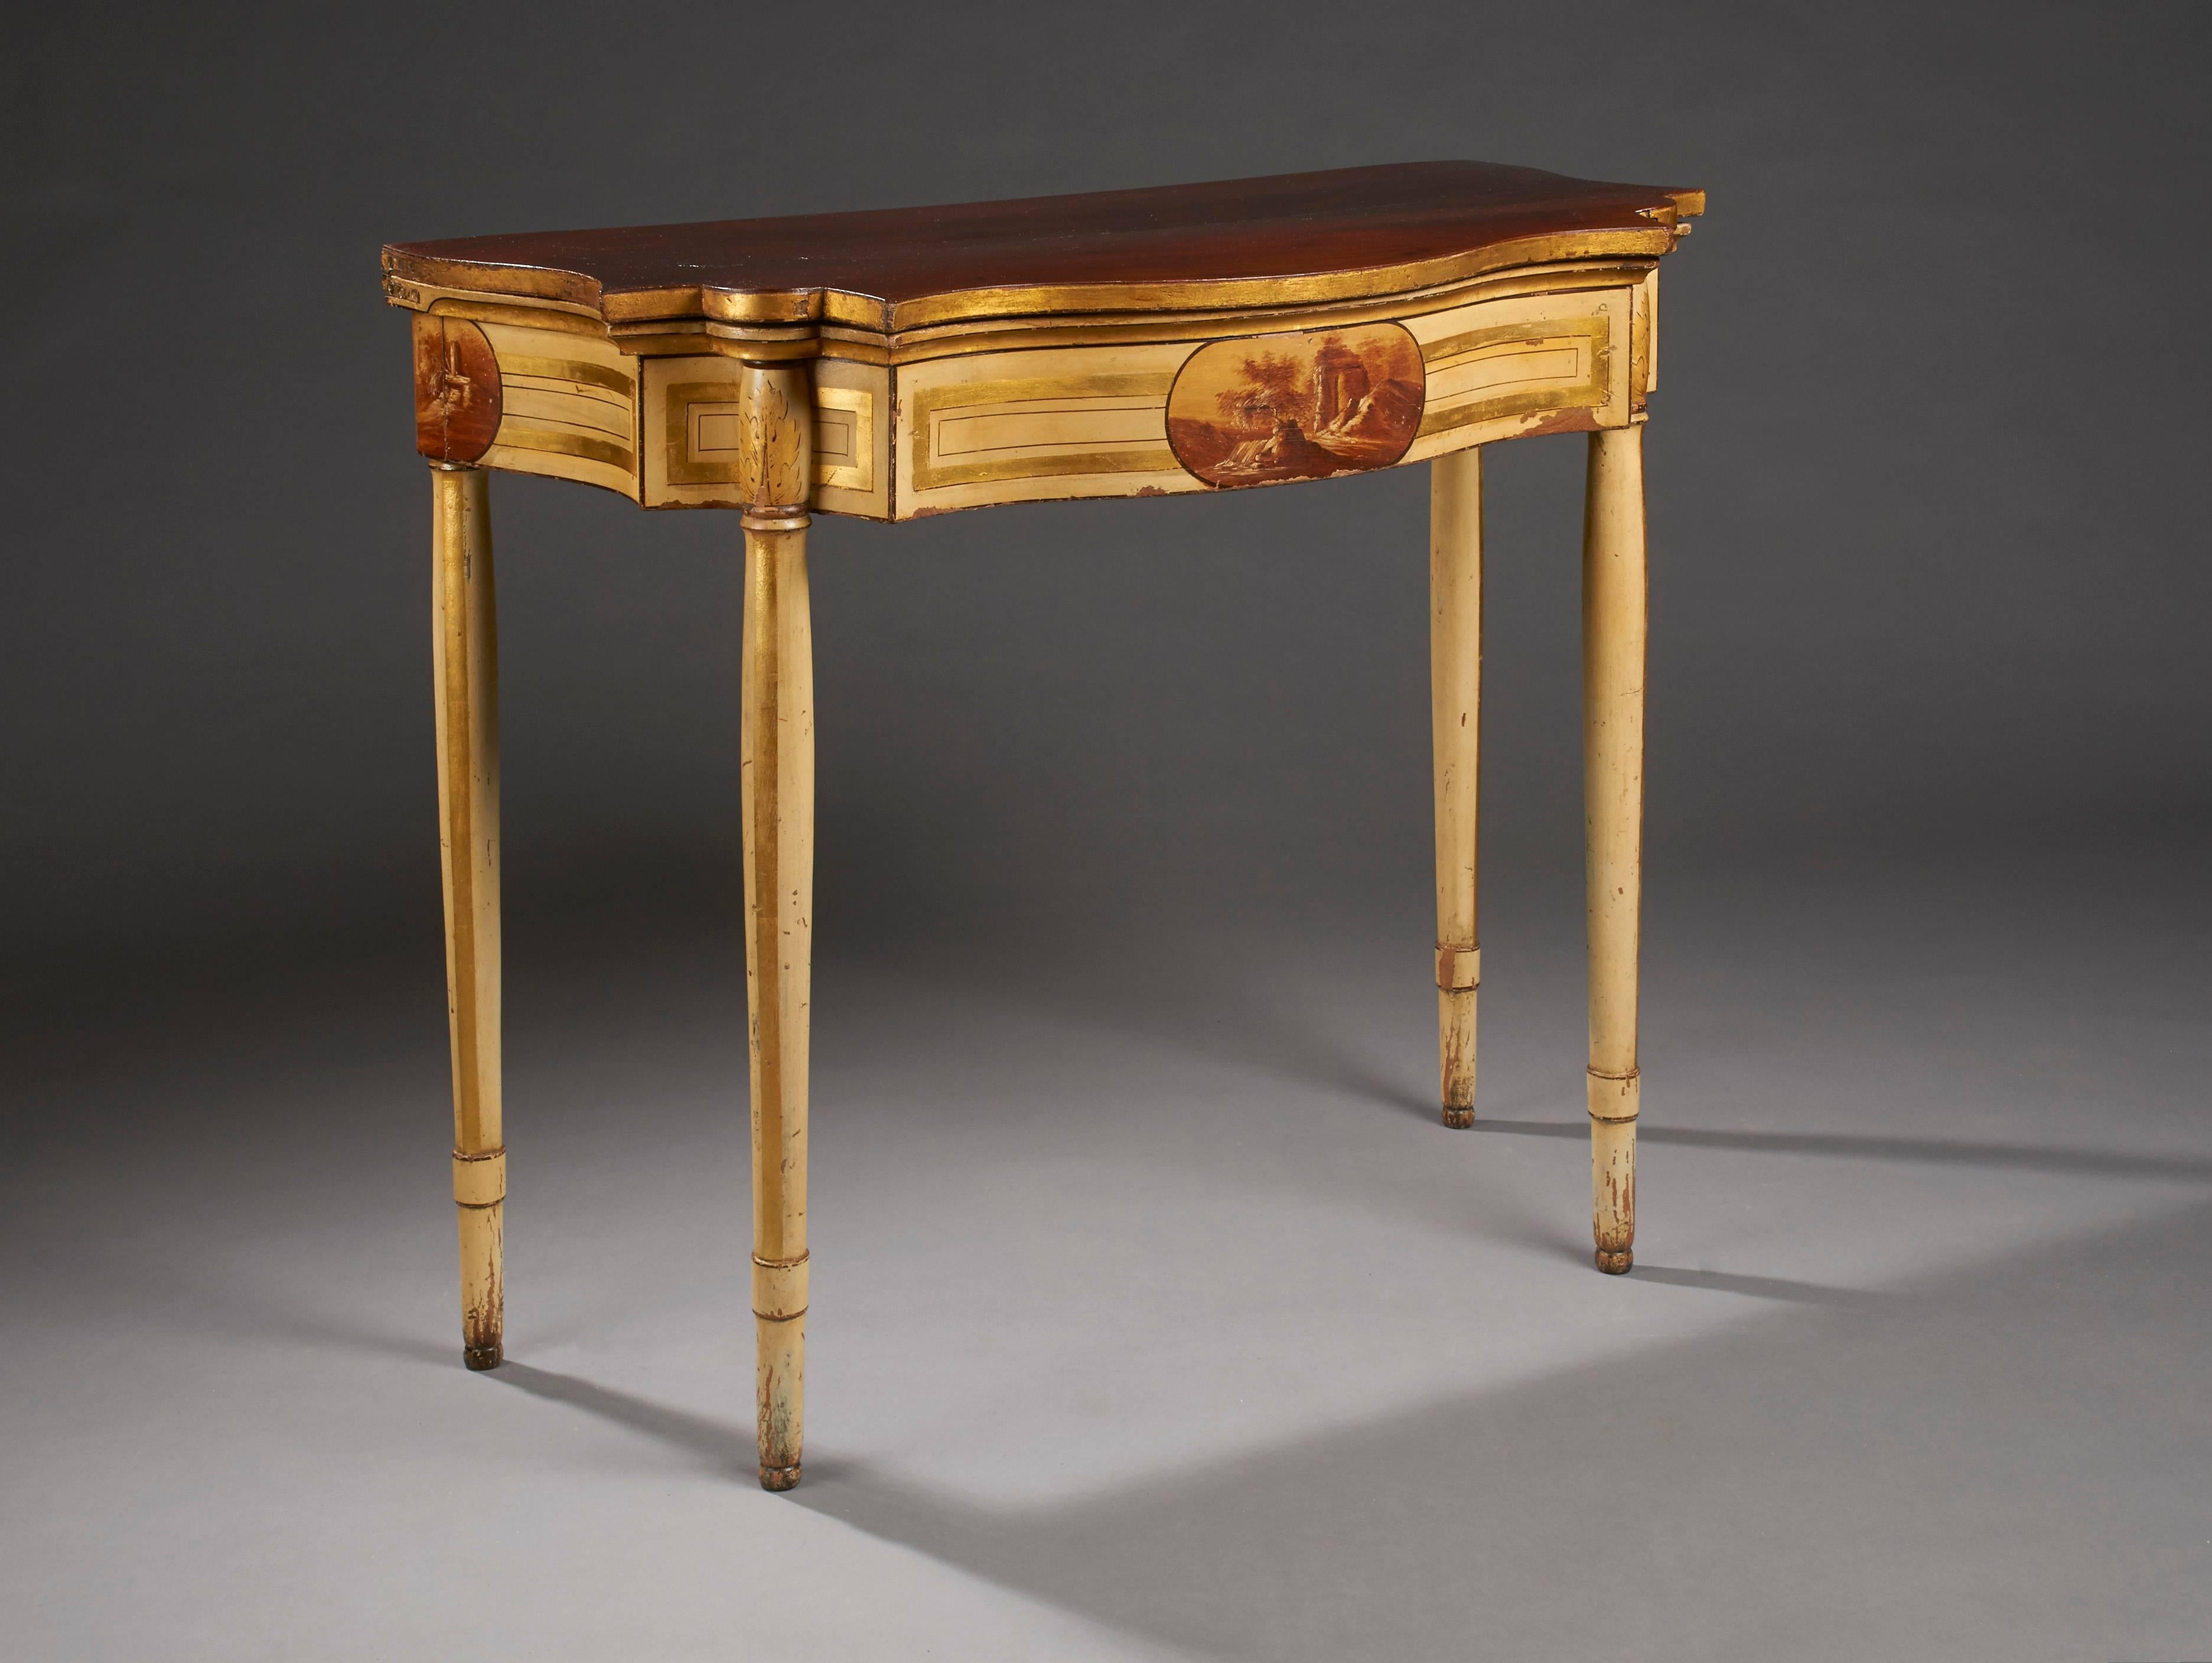 A card table from Baltimore painted with original painted and gilded classical scenes of ruins in a romantic landscape both on the front and side aprons. This example has highly developed contours with a serpentine front, half-serpentine ends and